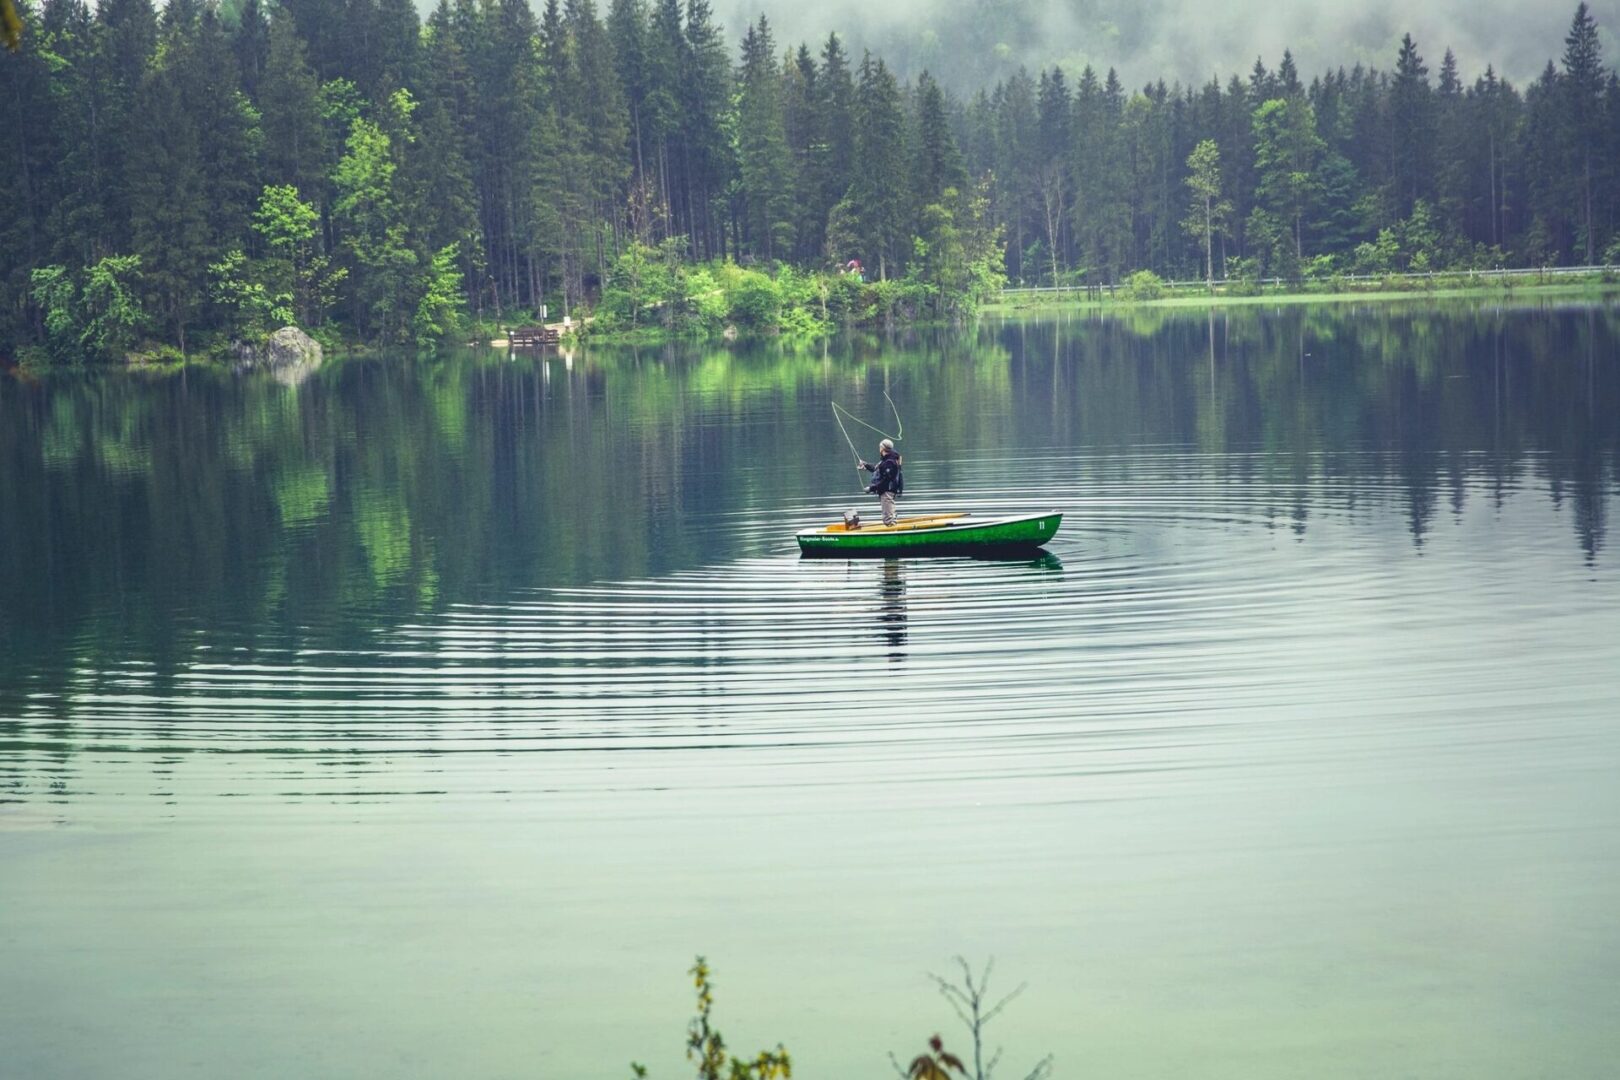 A person in a green boat on the water.